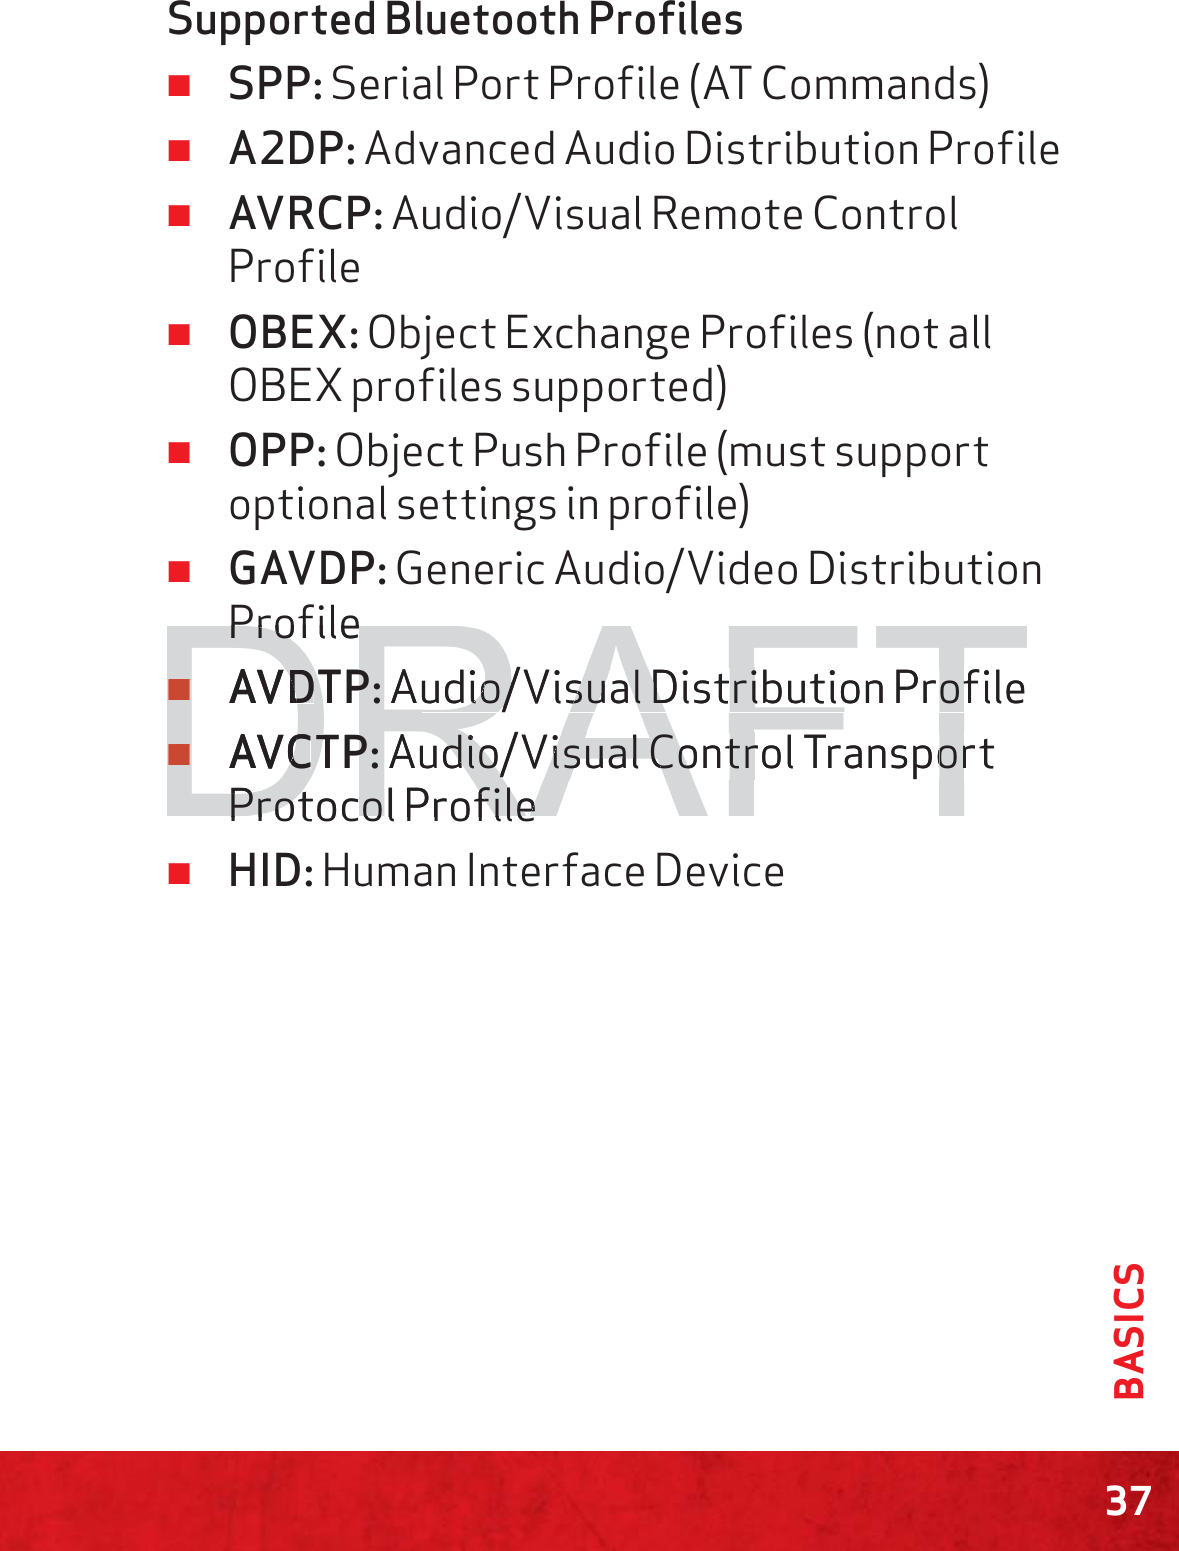 37BASICSSupported Bluetooth Proﬁles ≠SPP: Serial Port Profile (AT Commands) ≠A2DP: Advanced Audio Distribution Profile ≠AVRCP: Audio/Visual Remote Control Profile ≠OBEX: Object Exchange Profiles (not all OBEX profiles supported) ≠OPP: Object Push Profile (must support optional settings in profile) ≠GAVDP: Generic Audio/Video Distribution Profile ≠AVDTP: Audio/Visual Distribution Profile ≠AVCTP: Audio/Visual Control Transport Protocol Profile ≠HID: Human Interface DeviceDRAFTProfilePro≠≠AVDDTP:TP:Audio/Visual Distribution Profileudio/Visual Distribution Prof≠≠AVCCTP:TP:Audio/Visual Control Transportudio/Visual Control TransporPProtocol Profilerotocol Profile